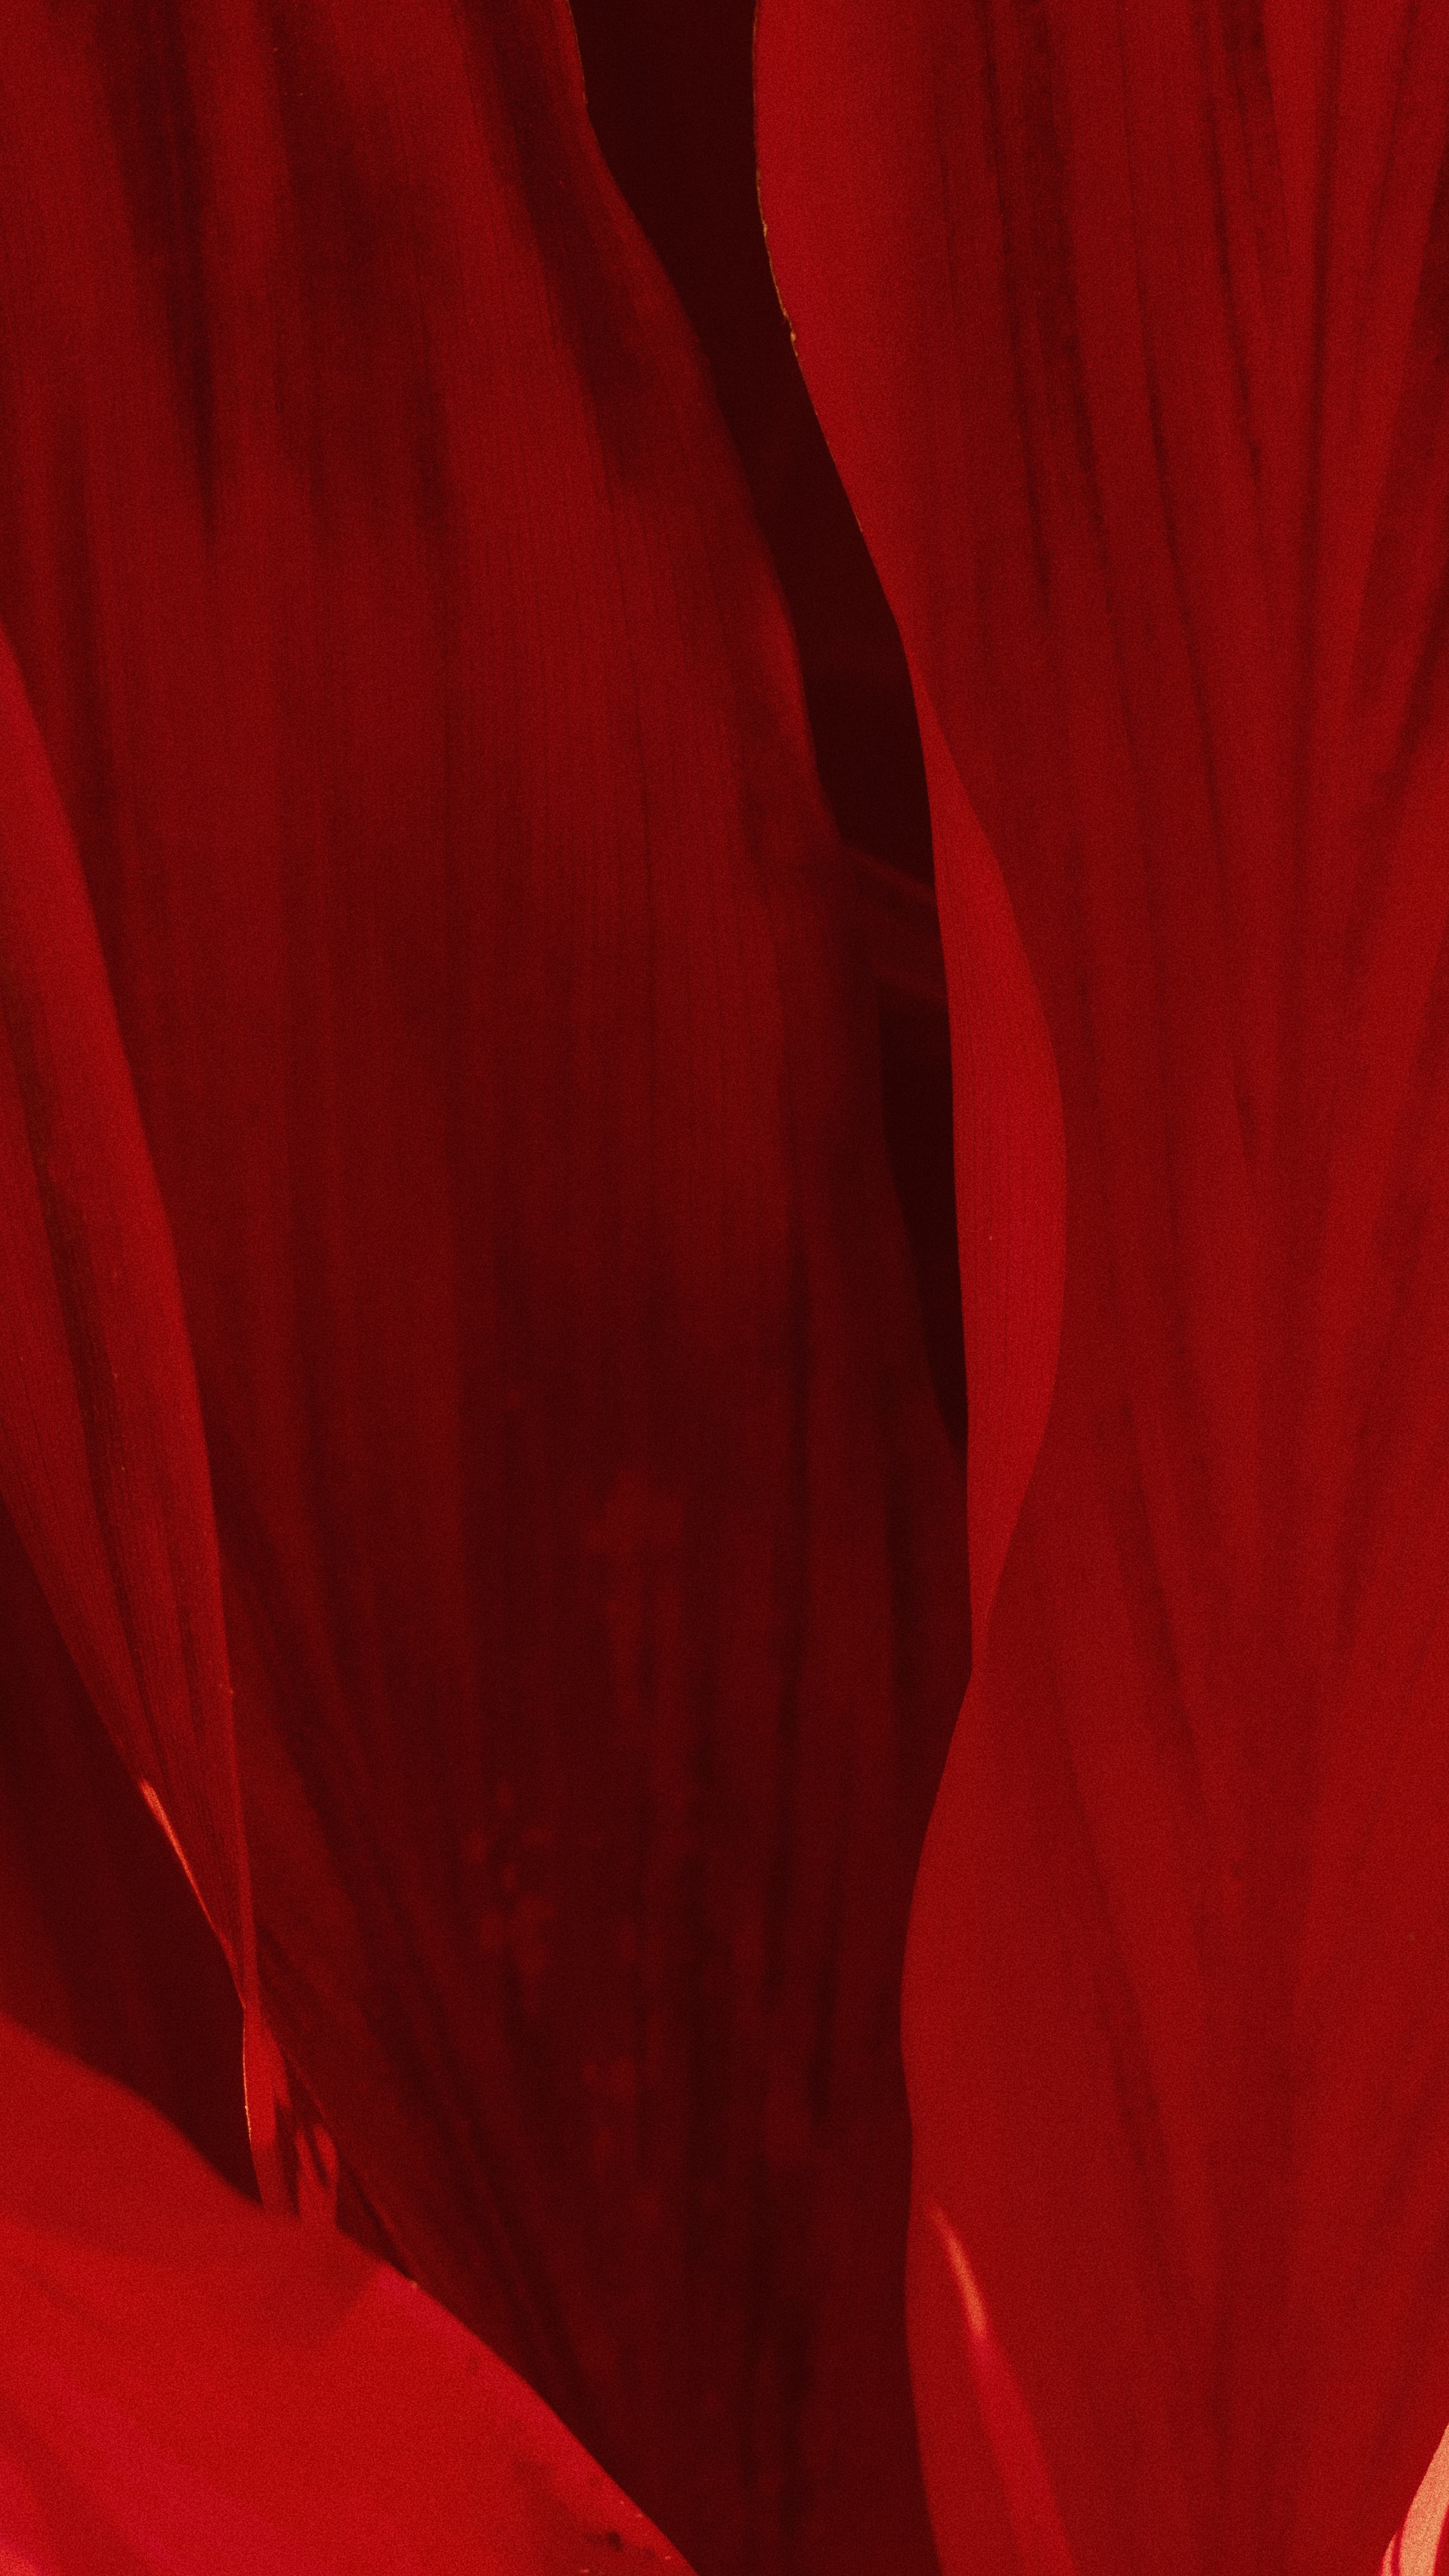 How To Install Red Wallpapers With Android Emulators